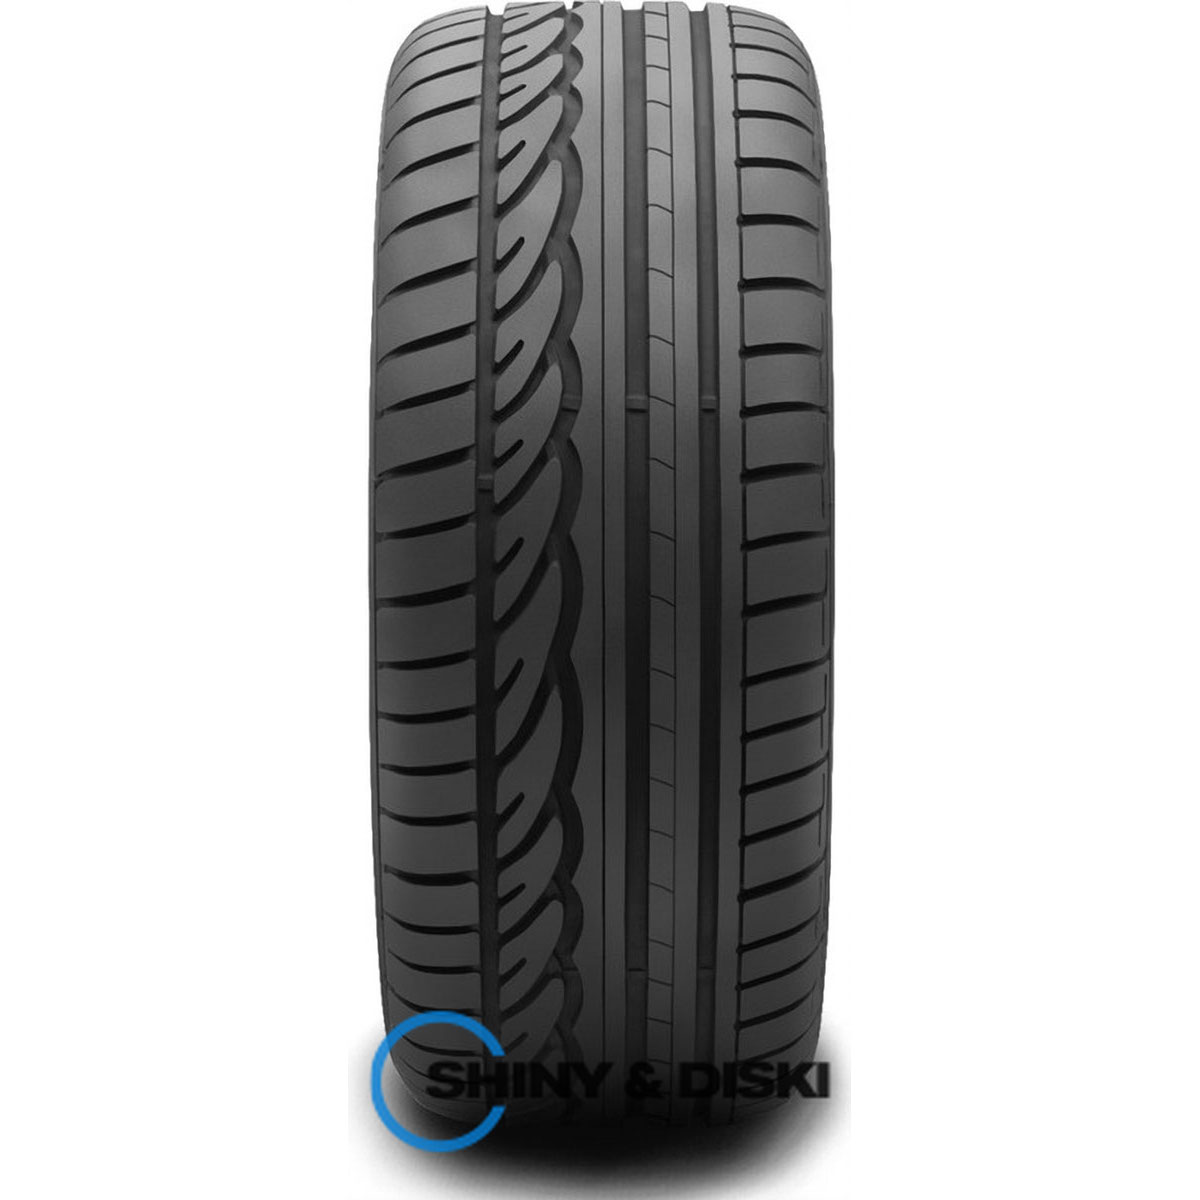 резина dunlop sp sport 01 a/s 235/45 r17 94w